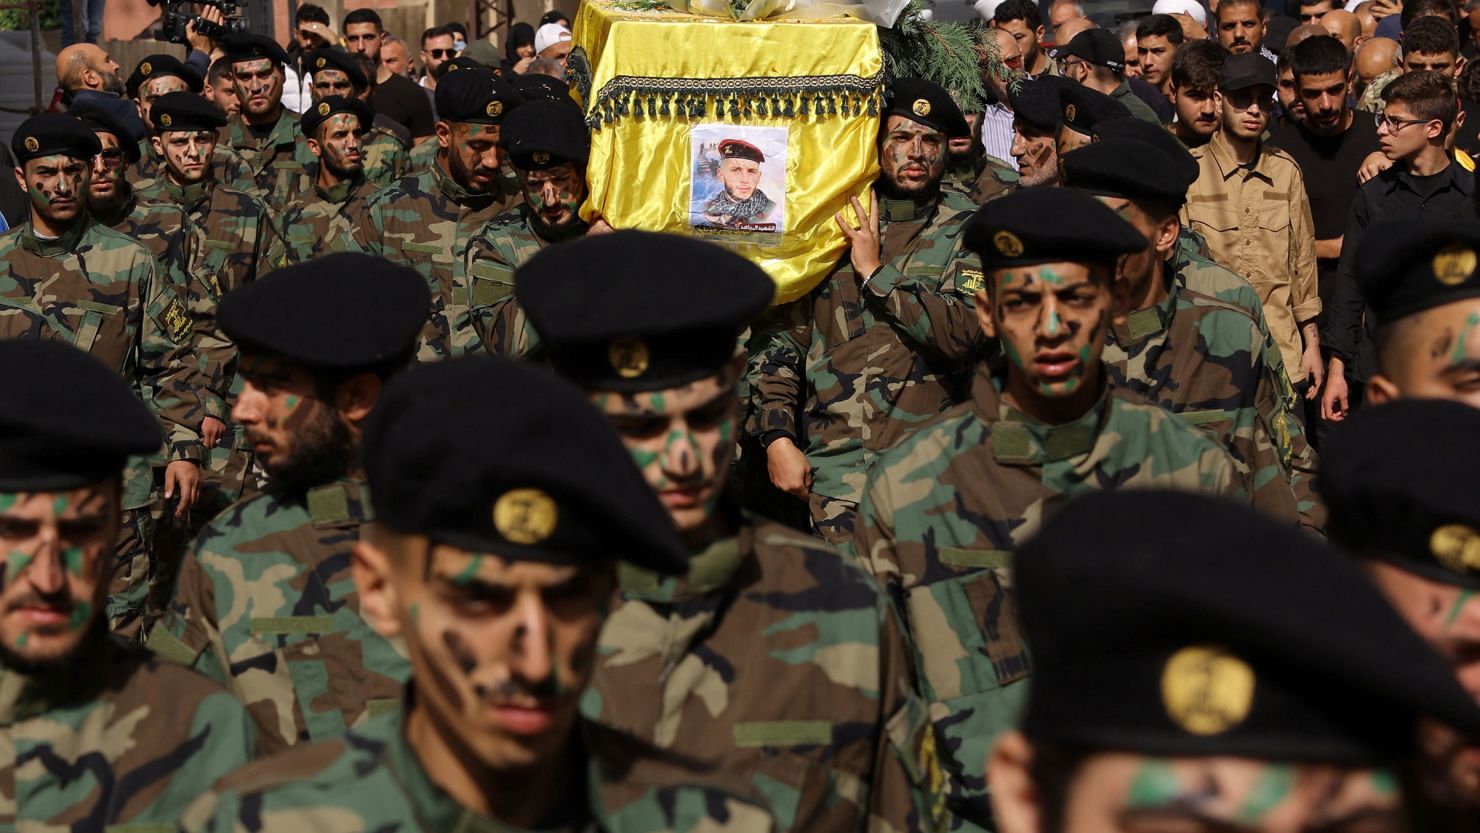 Members of Hezbollah carry the coffin of Hezbollah member Abbas Shuman, who was killed in southern Lebanon amidst tension between Israel and Hezbollah, during his funeral, in Baalbek, Lebanon, on October 23.